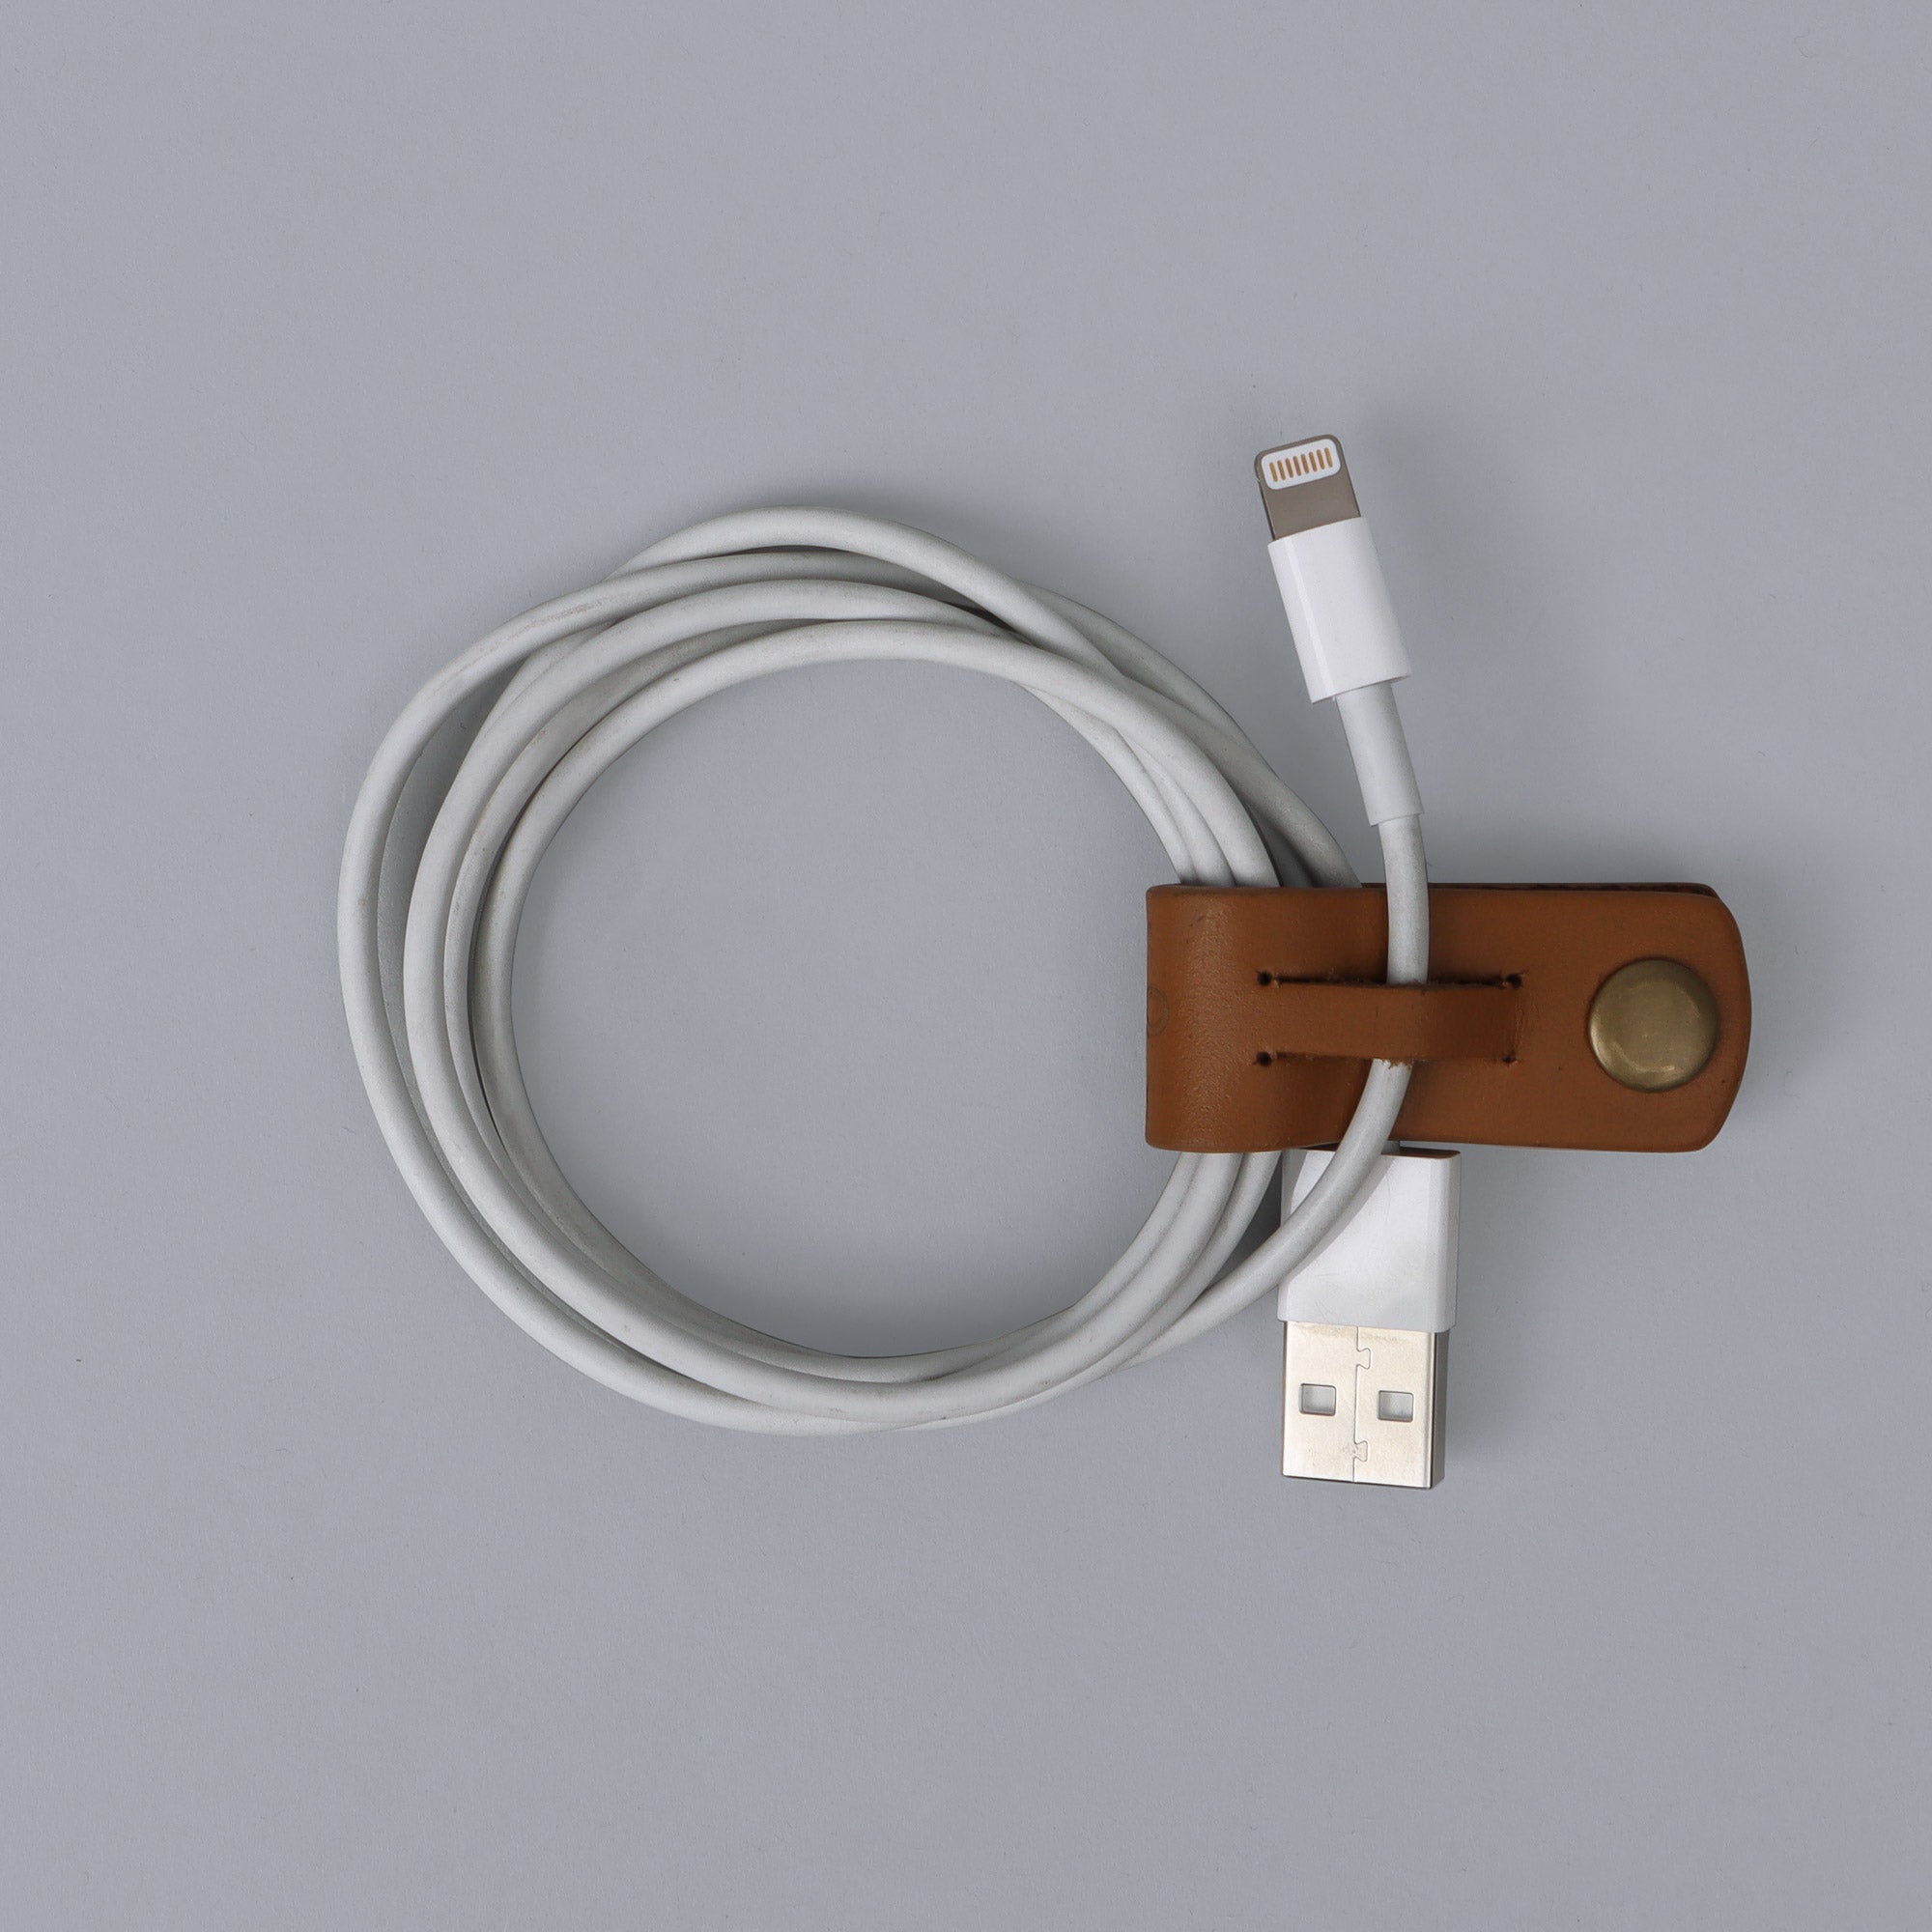 Tan leather cable wrap